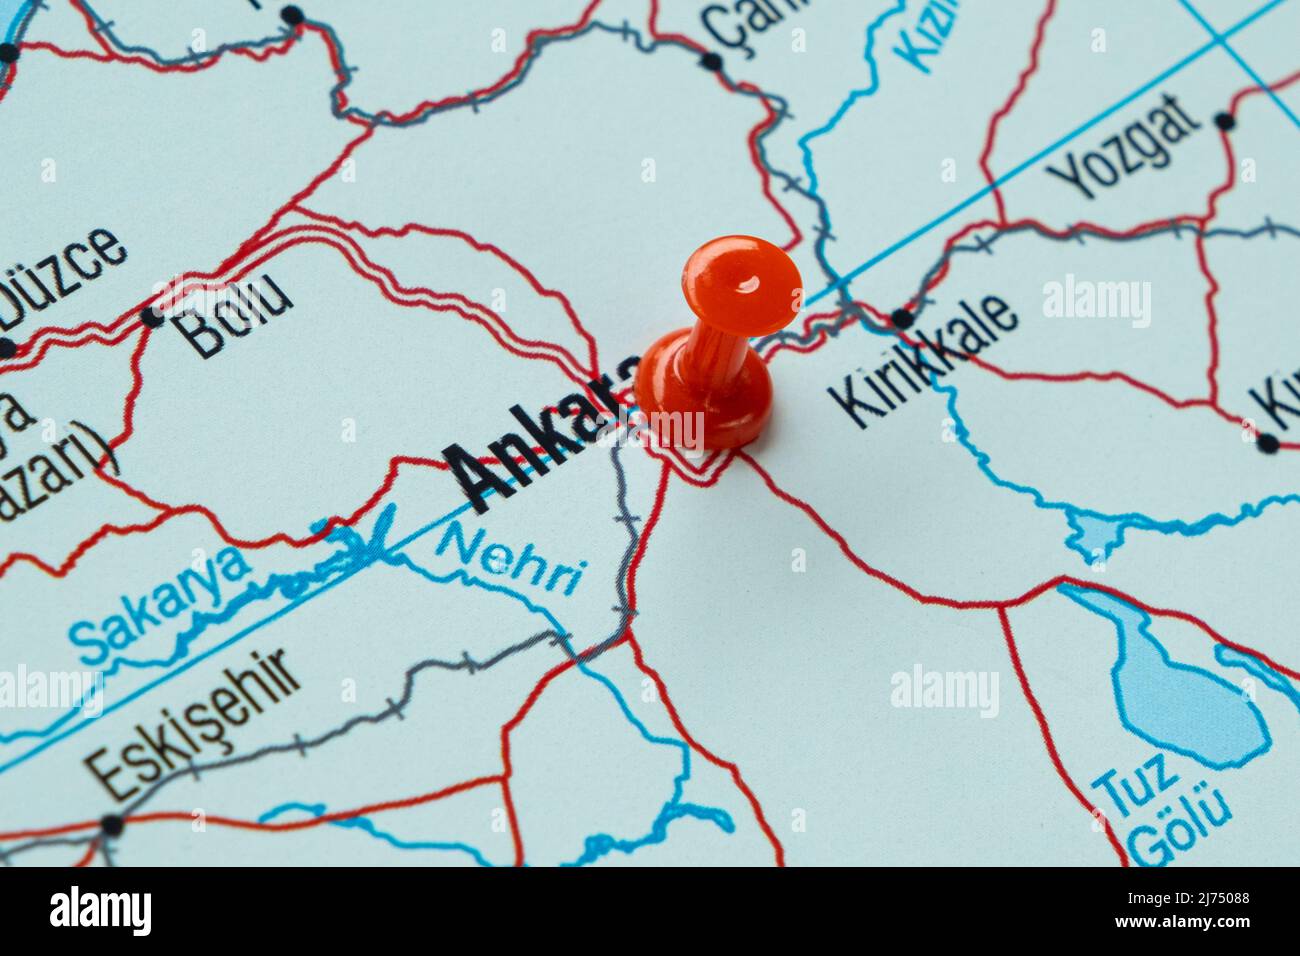 Ankara location on map with red thumbtack, travel idea, Turkey and Ankara on map with a red fastener, vacation and road trip concept, capital Stock Photo